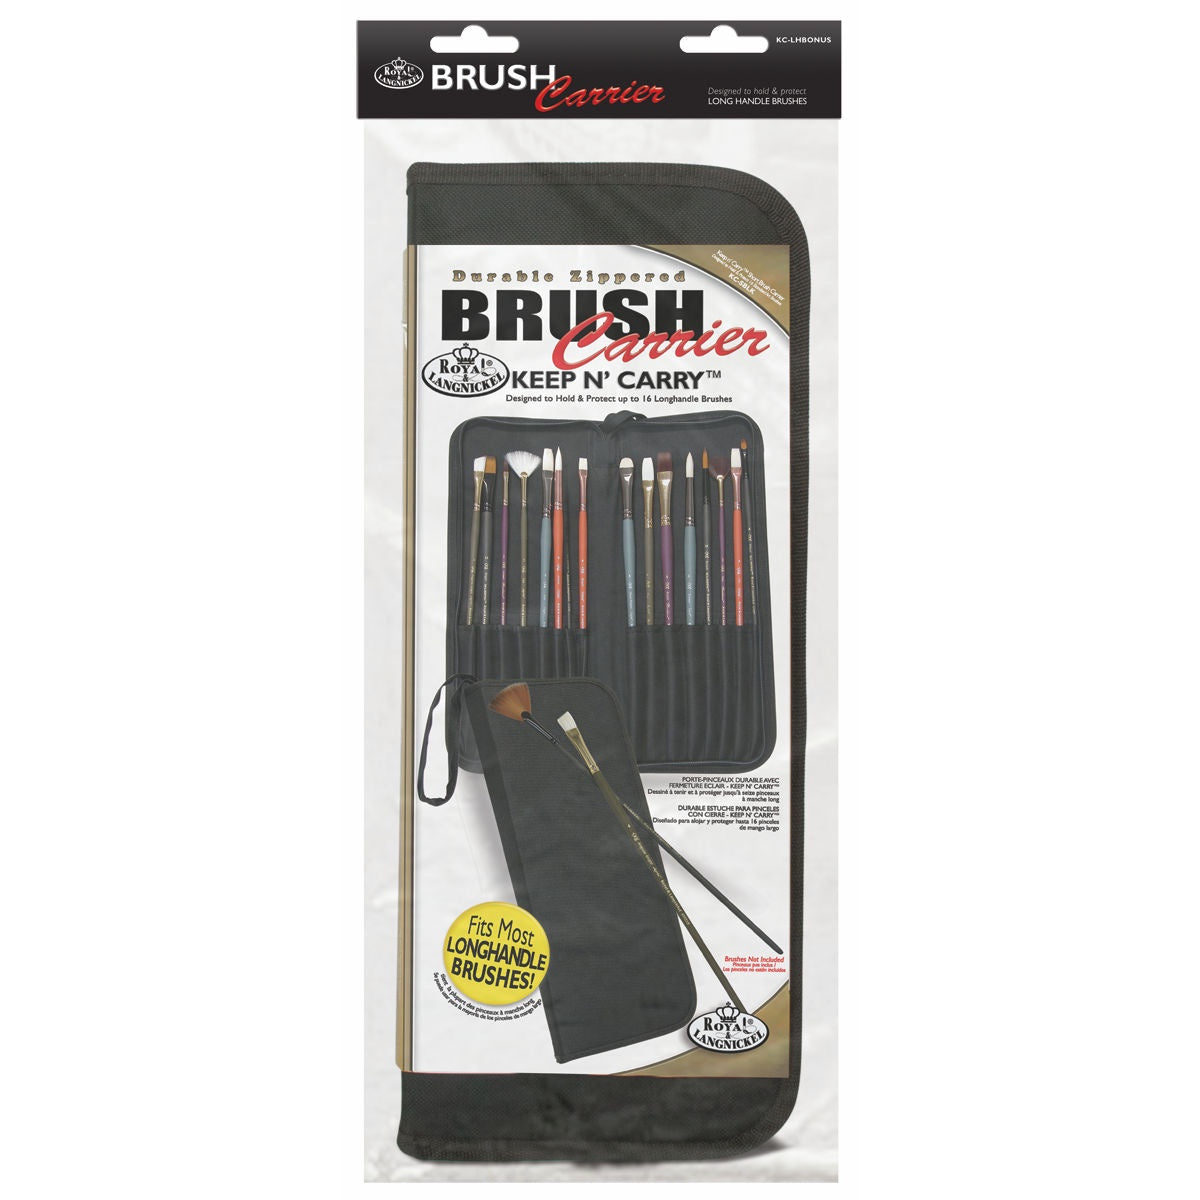 Zippered Brush Carrier Case Holds & Protects 16 Long Handle Brushes